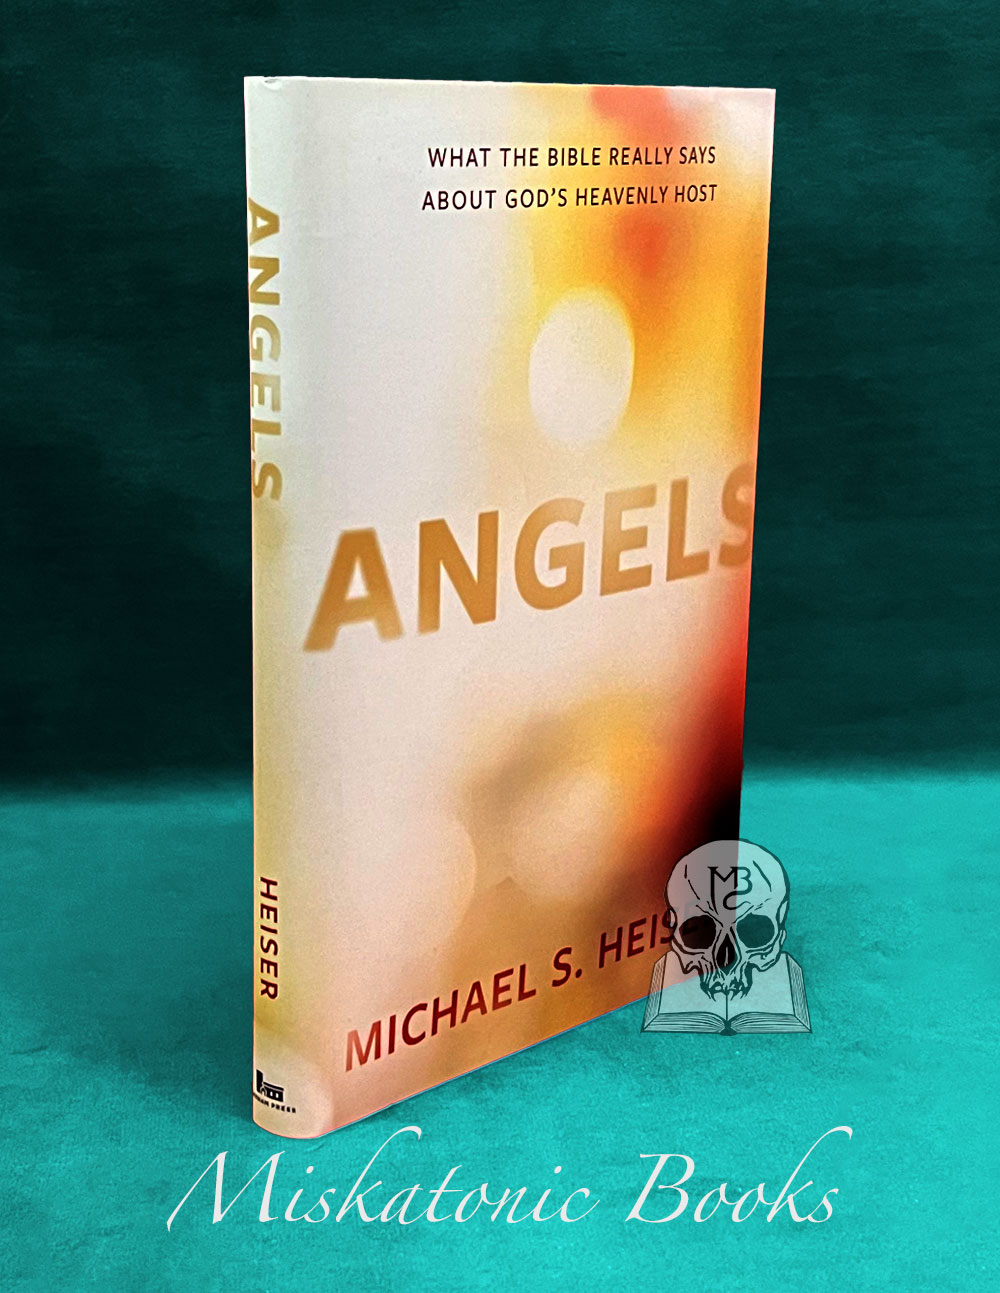 ANGELS: What the Bible Really Says About God’s Heavenly Host by Michael S. Heiser - Hardcover Edition